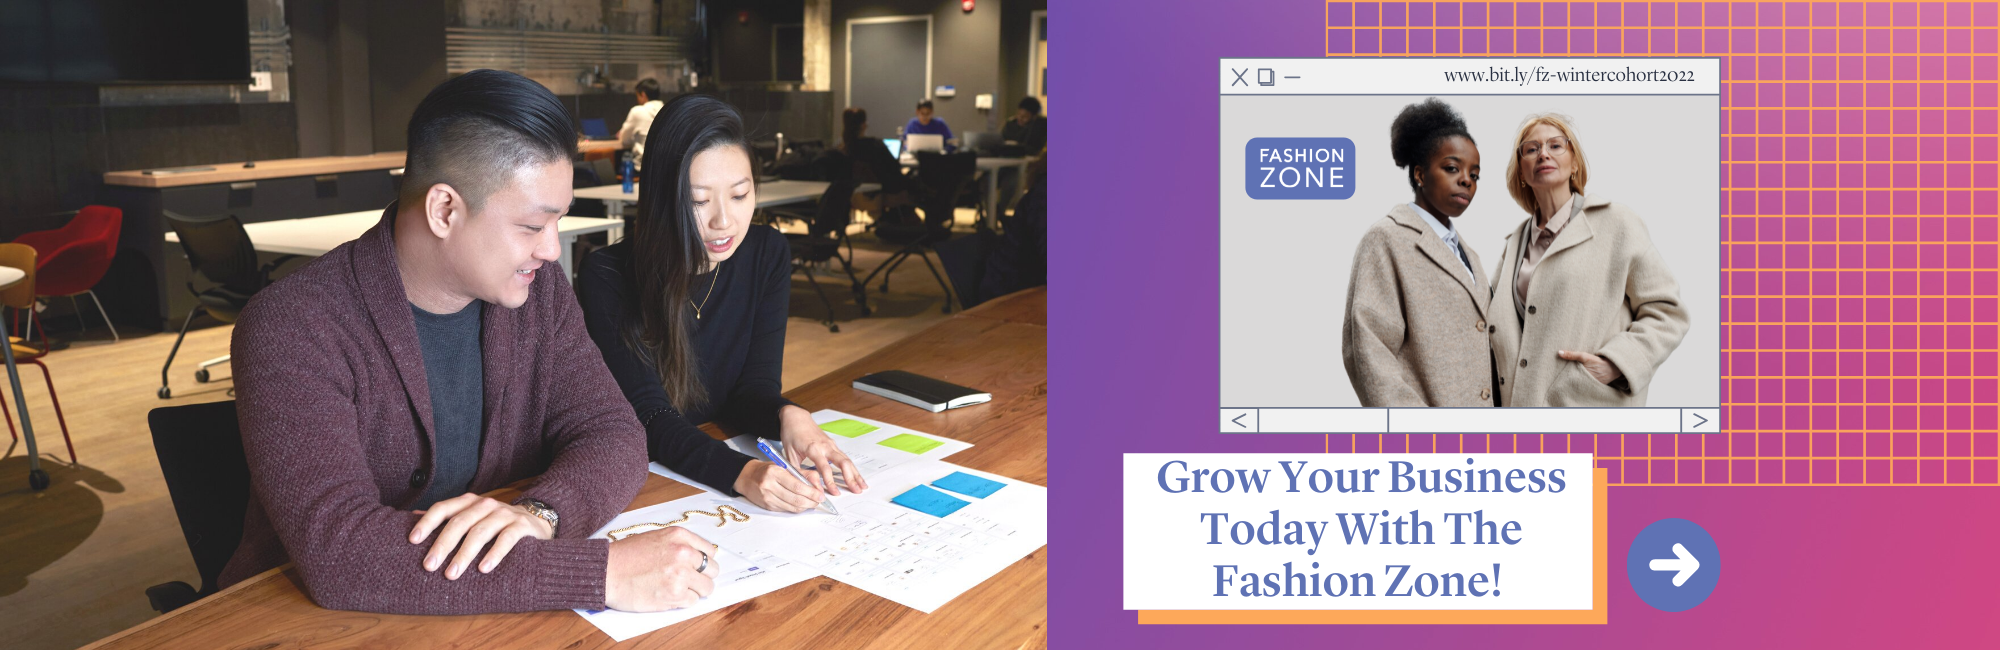 Grow Your Business Today With The Fashion Zone!